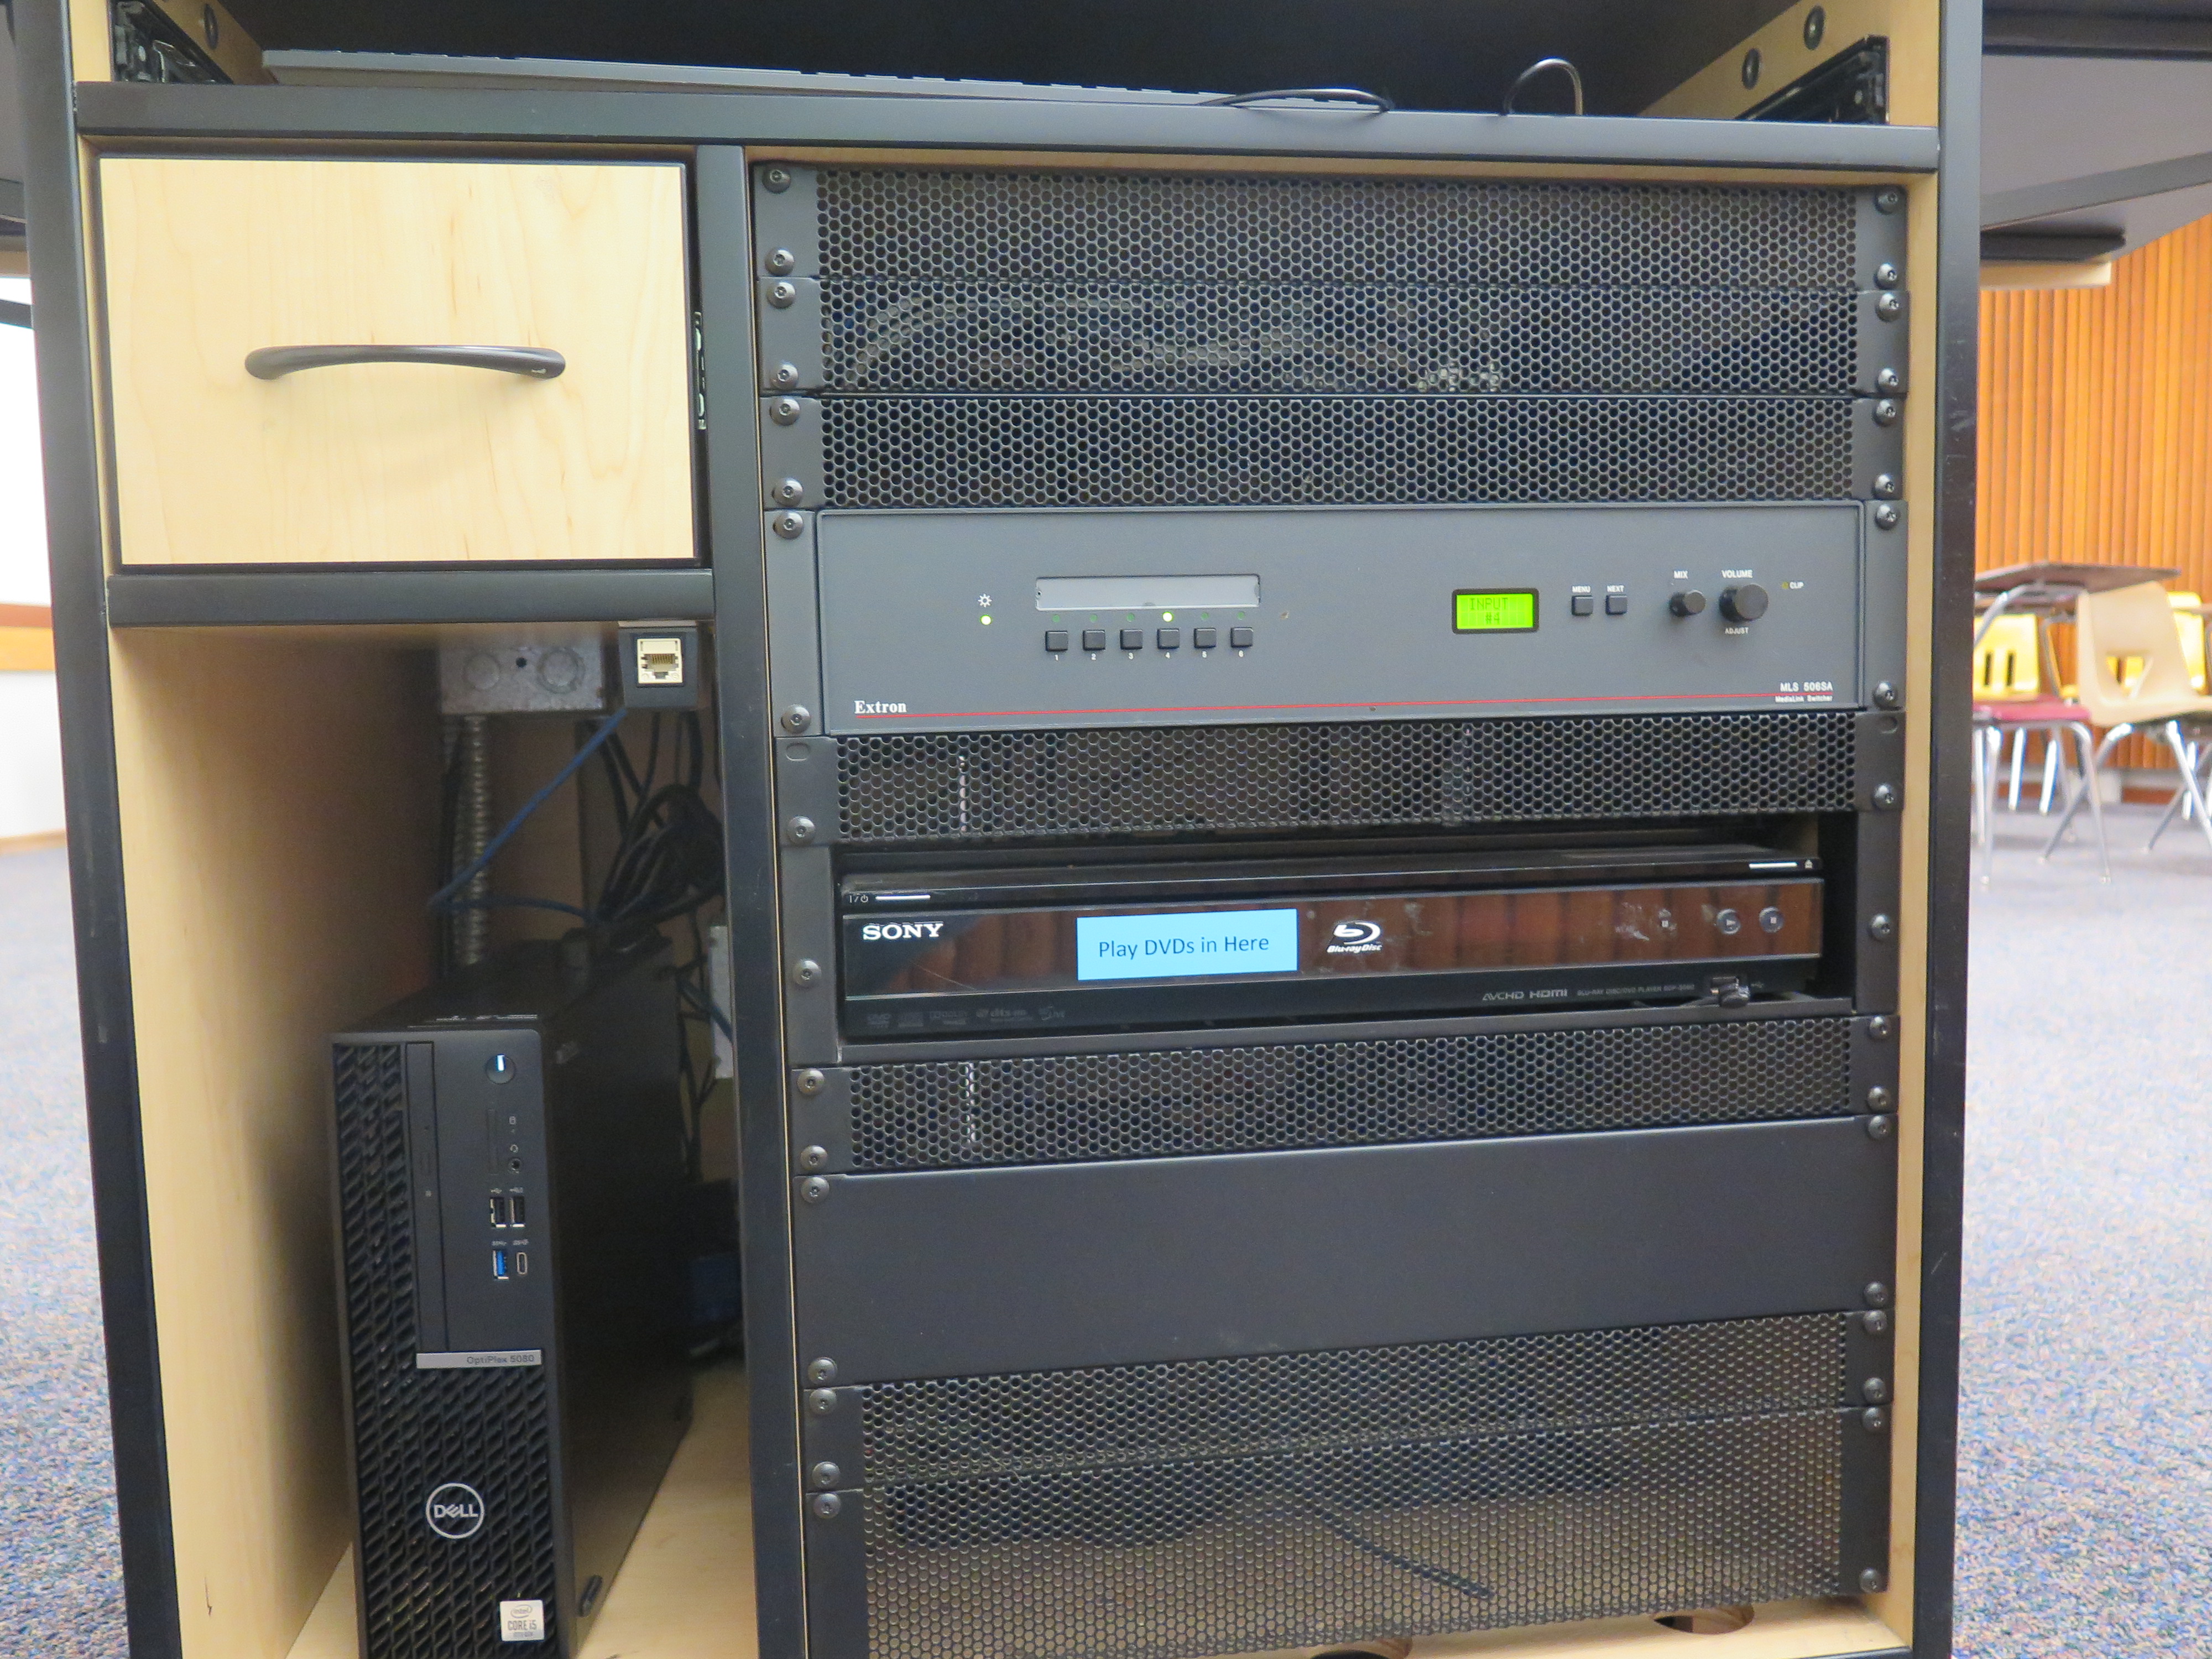 Display rack consists of a AV controller, Blu-Ray/DVD player and Dell Computer CPU.